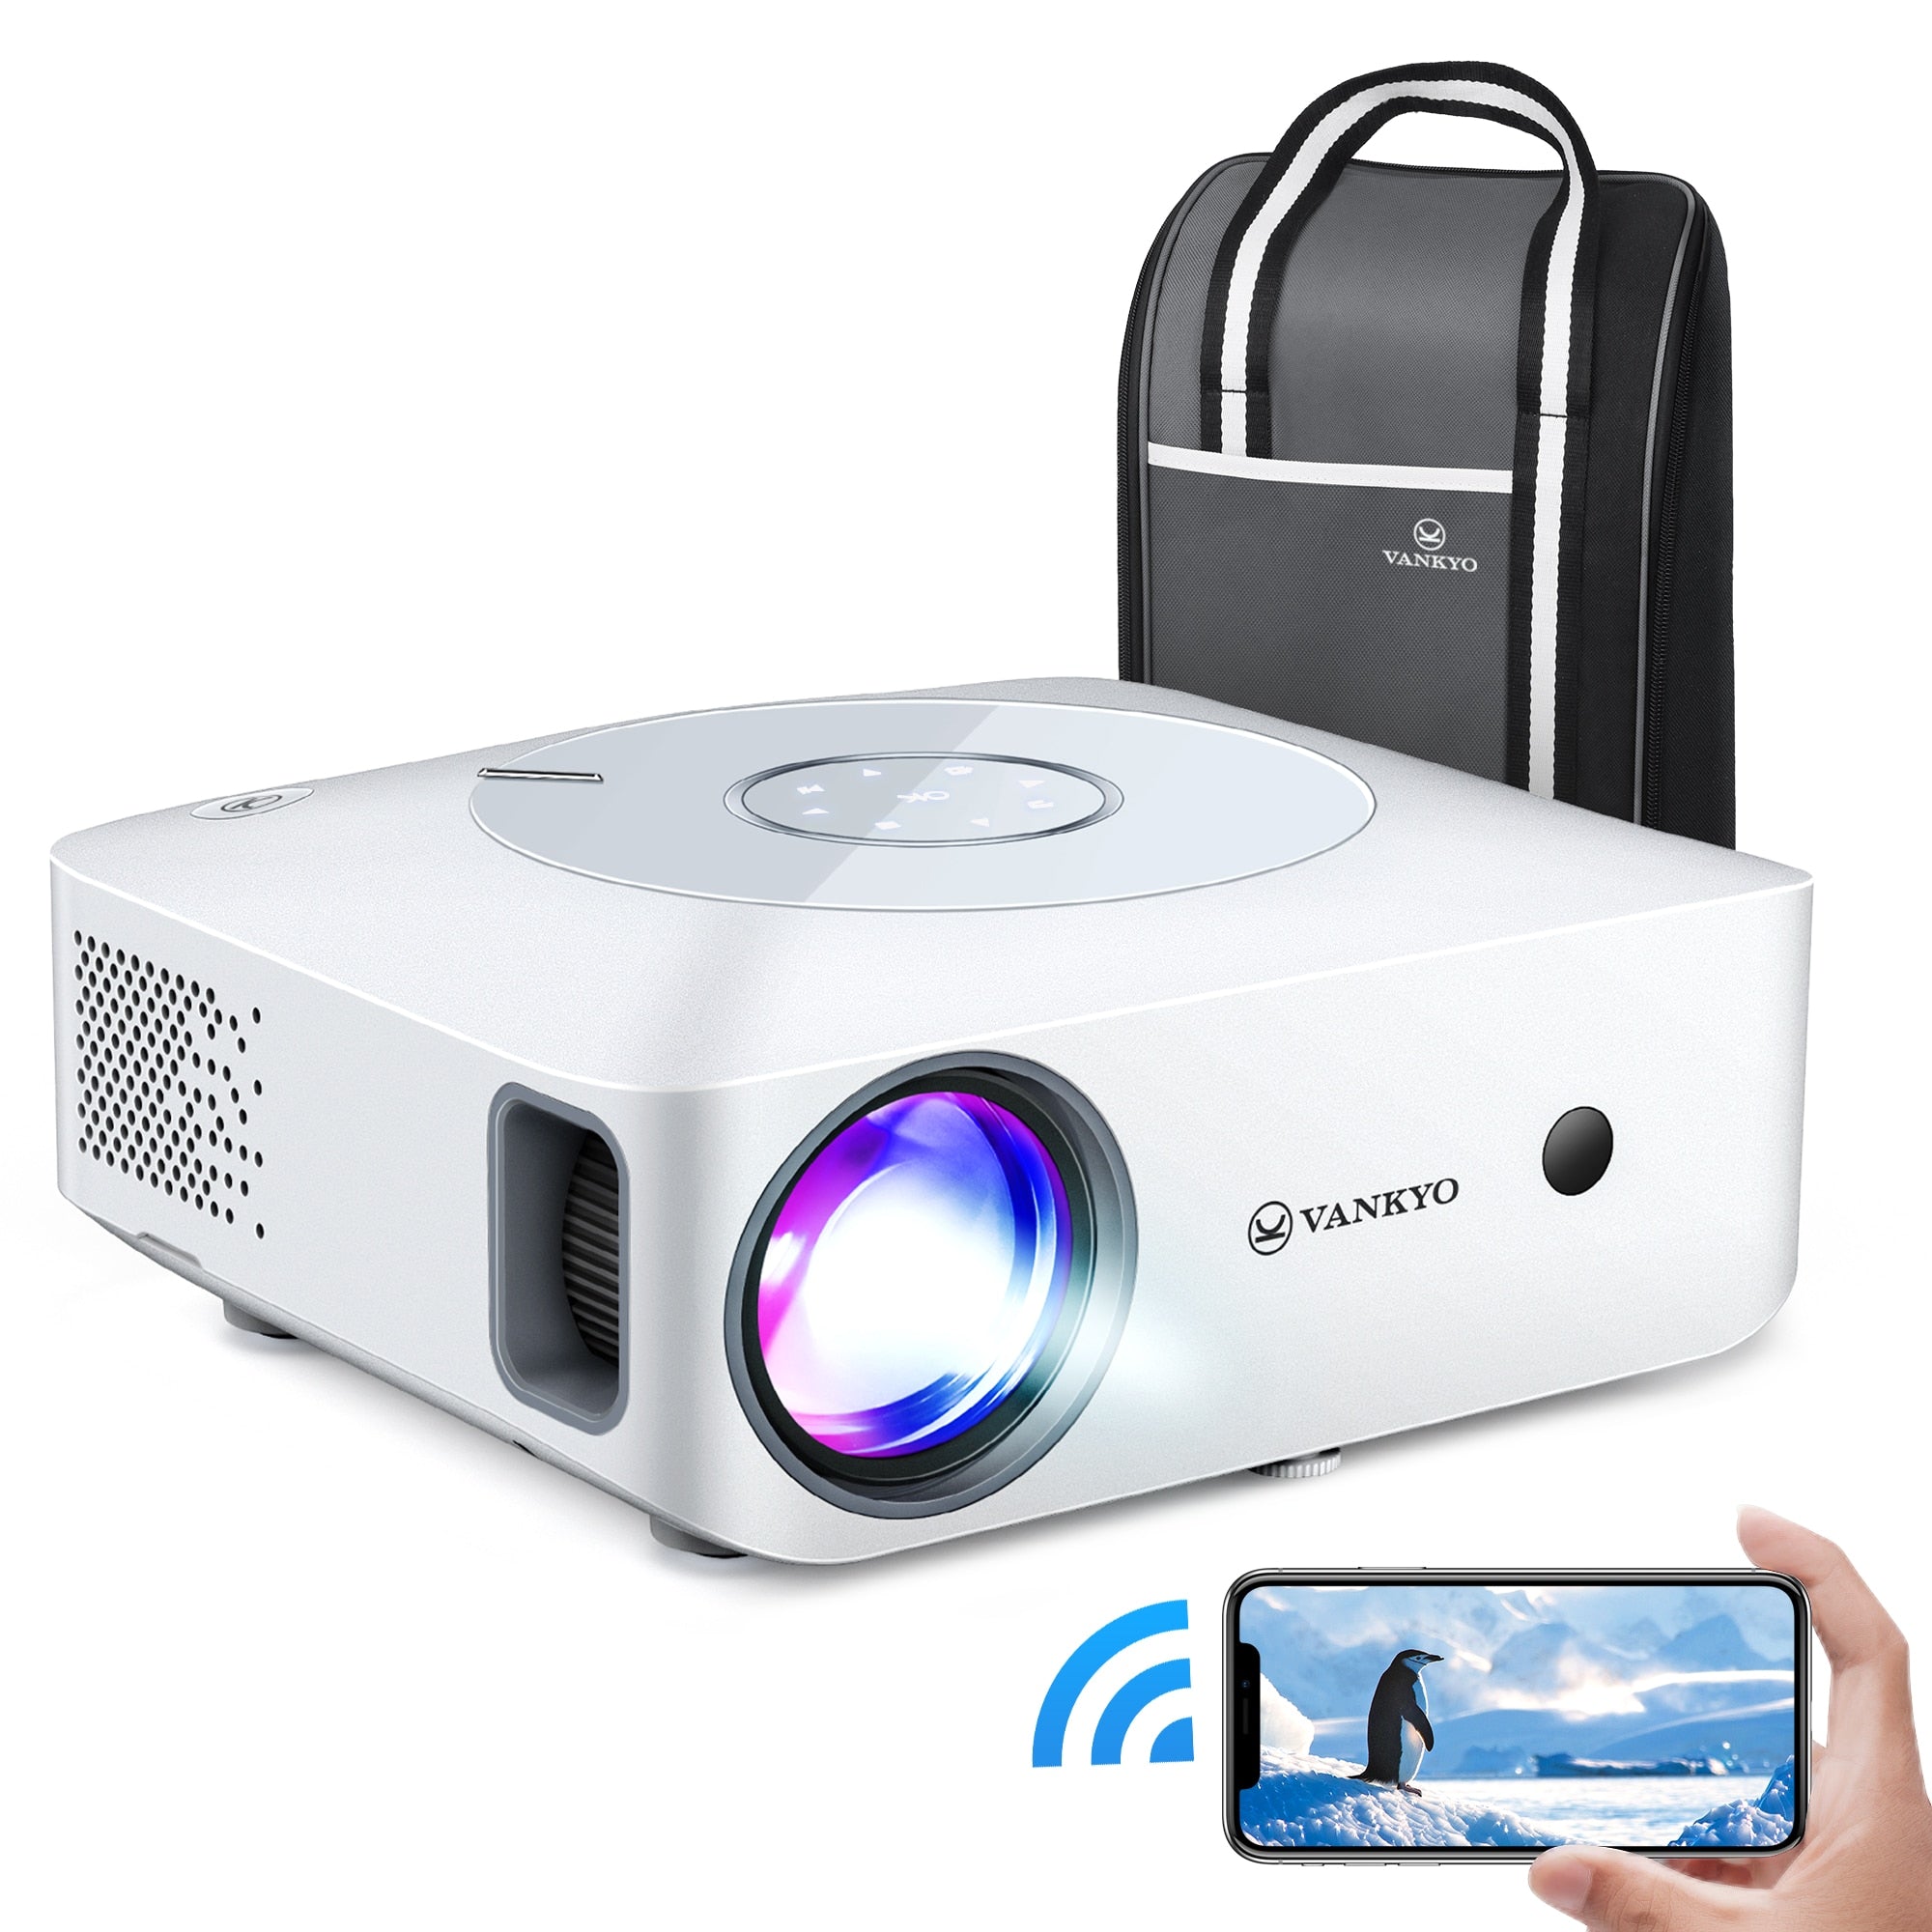 VANKYO 1080P Projector Leisure 530W Full HD 5G WiFi Projector Support 4K Synchronize Mirroring File SYNC Screen MINI Projector